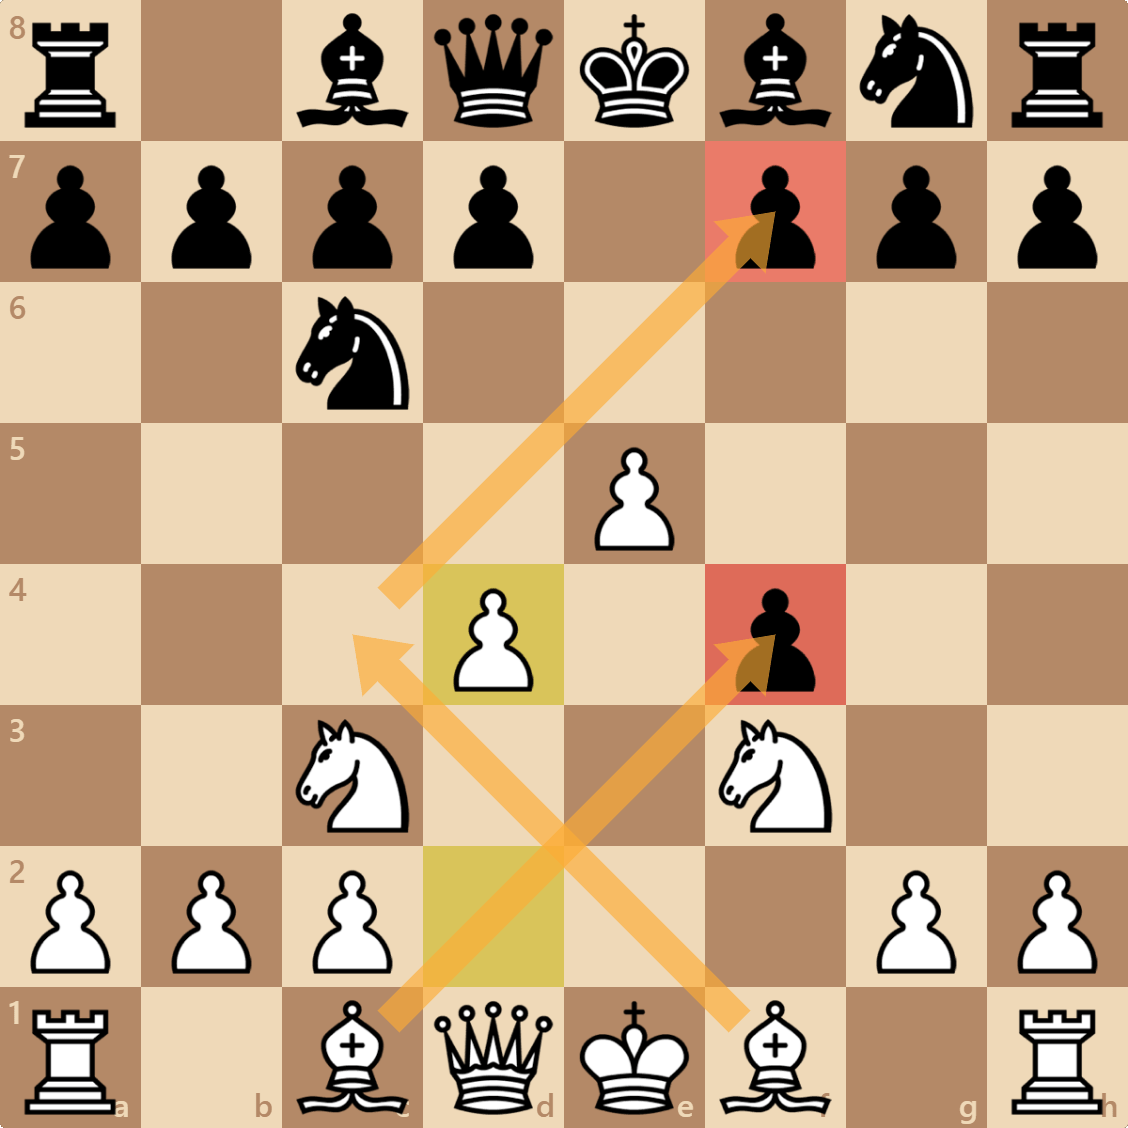 Is the Vienna Gambit a Good Opening? 